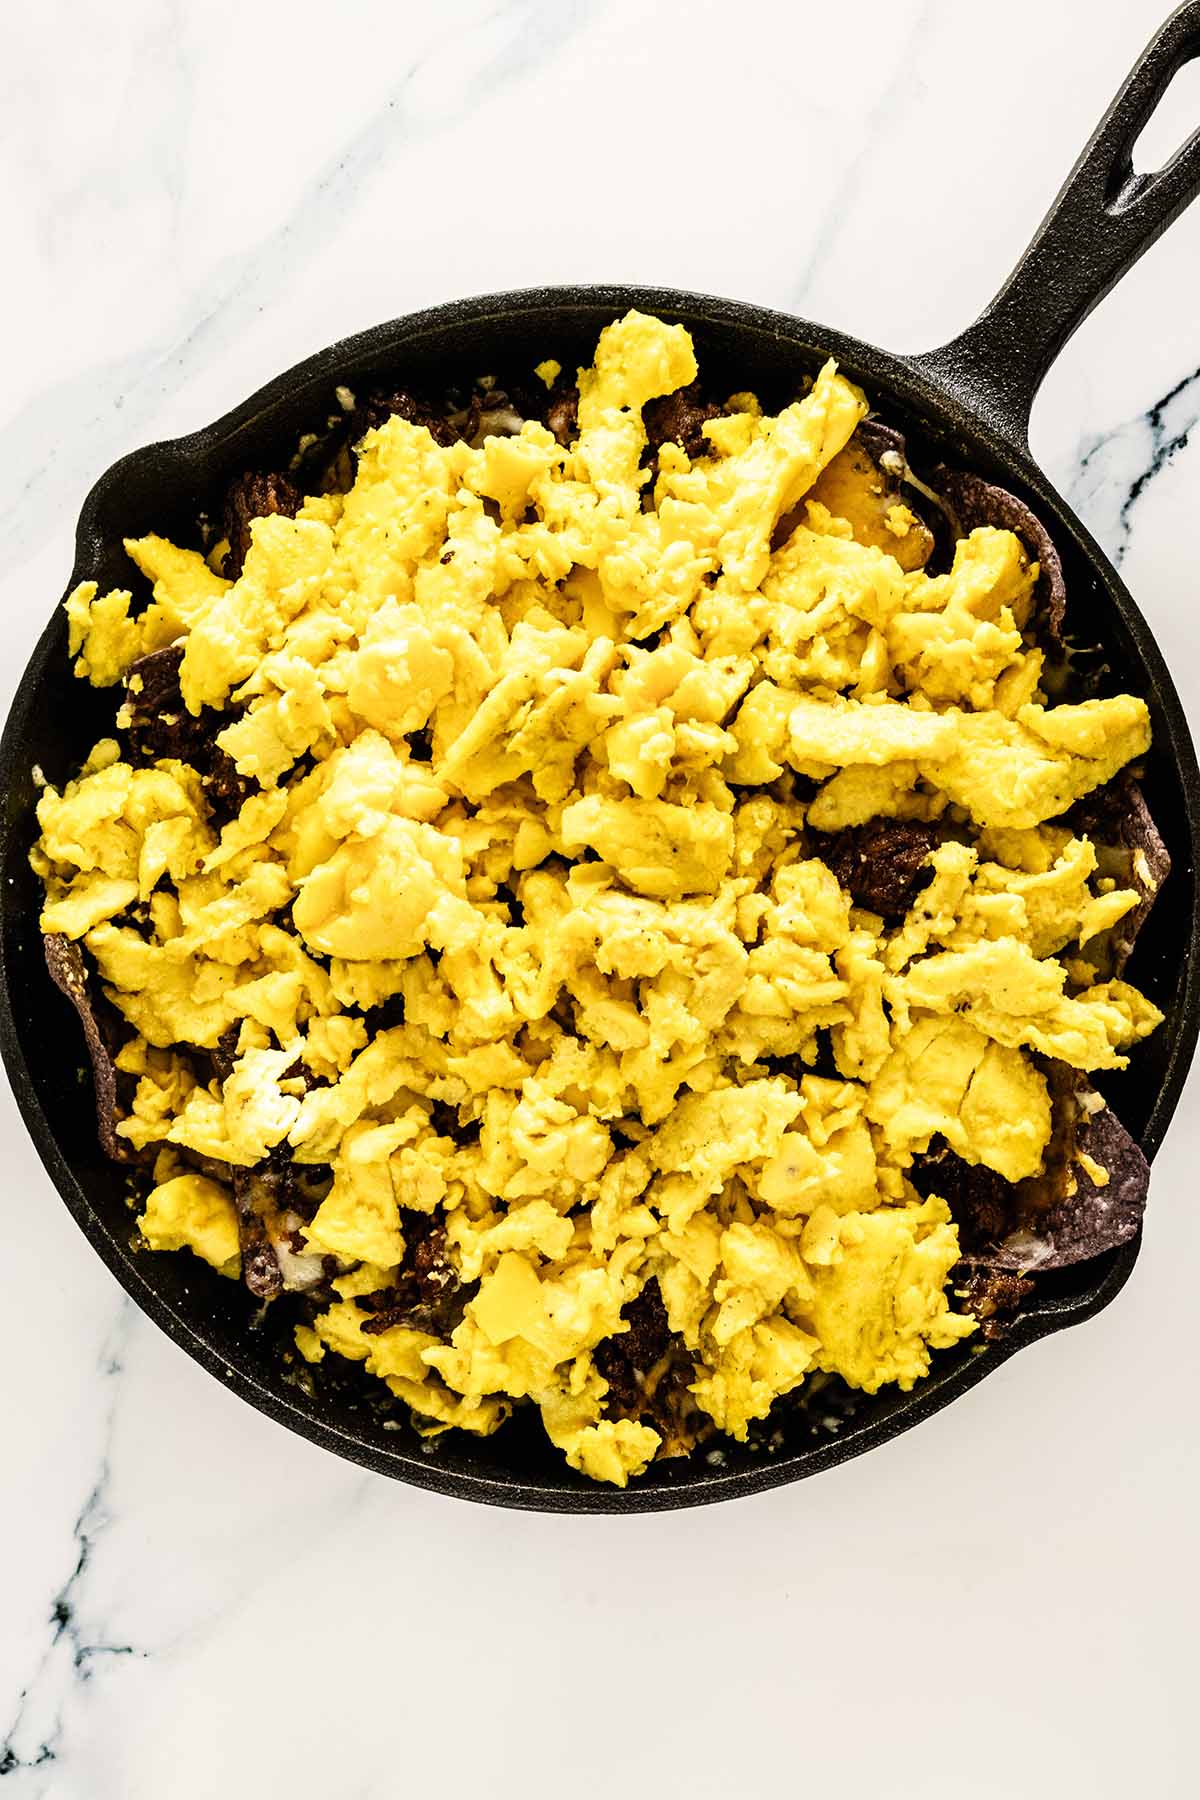 Overhead view of scrambled eggs added to cast iron skillet on white marble background.